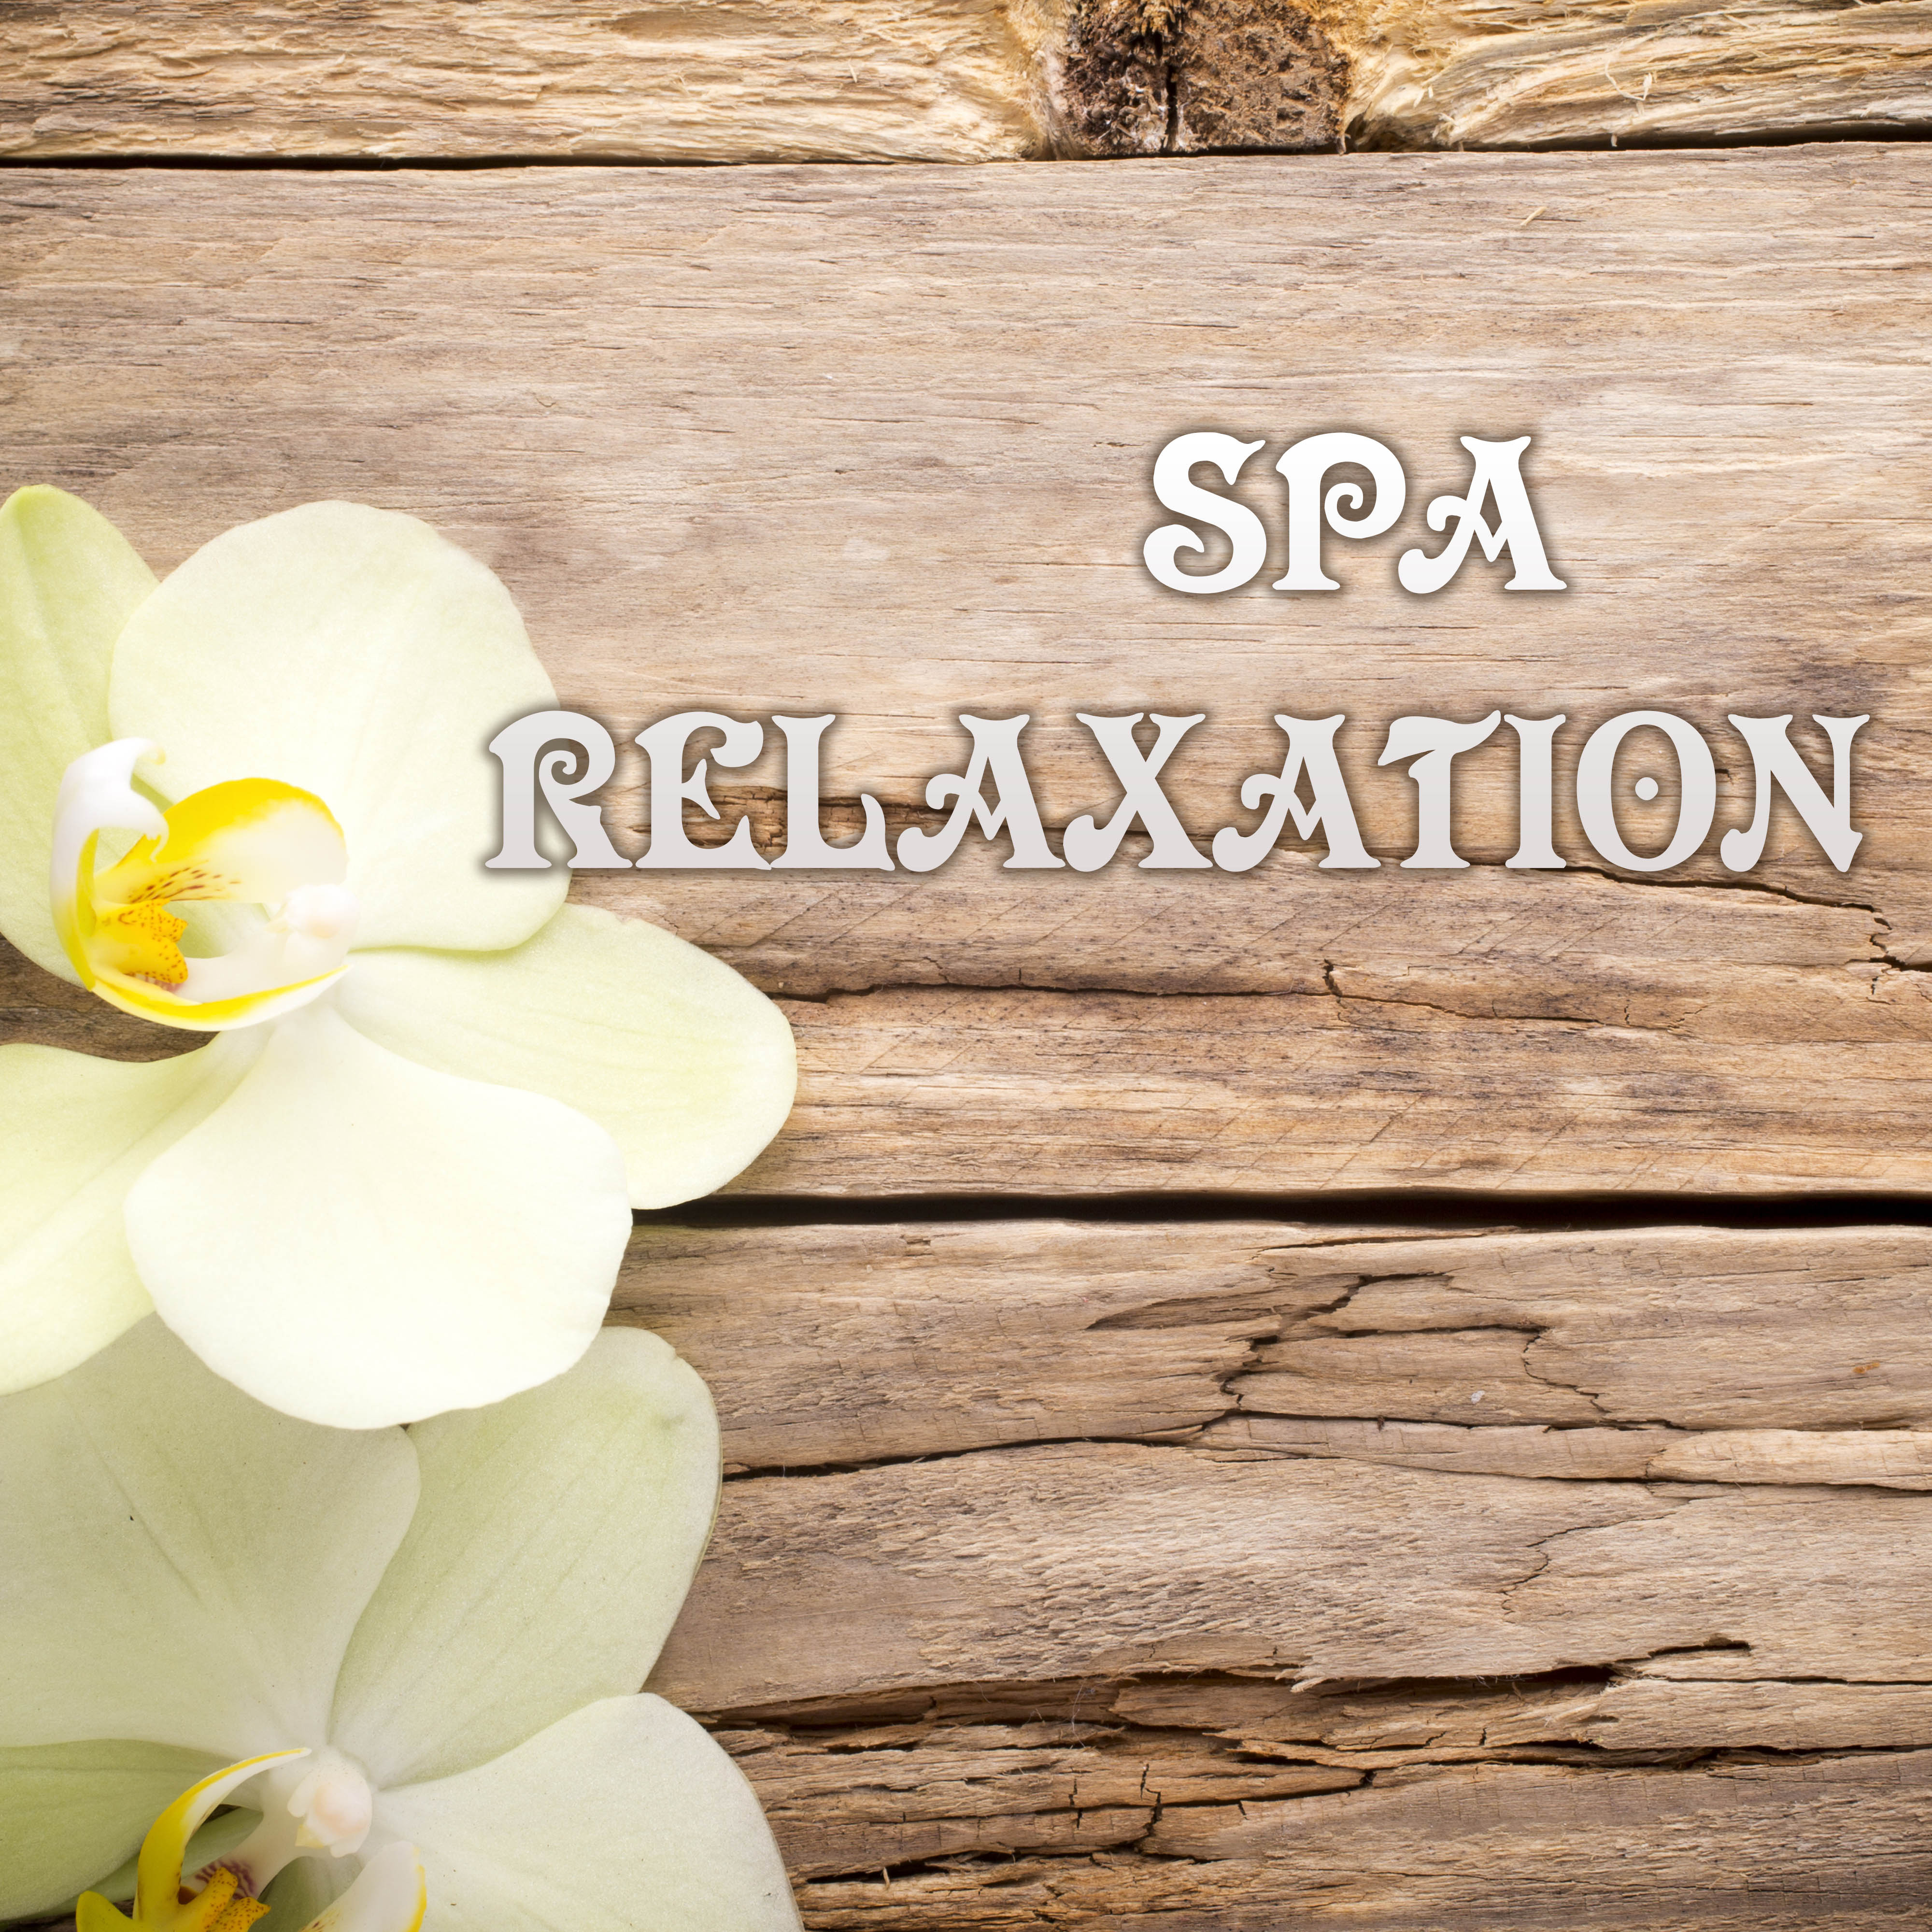 Spa, Relaxation & Deep Meditation Dream Sounds - New Age Music